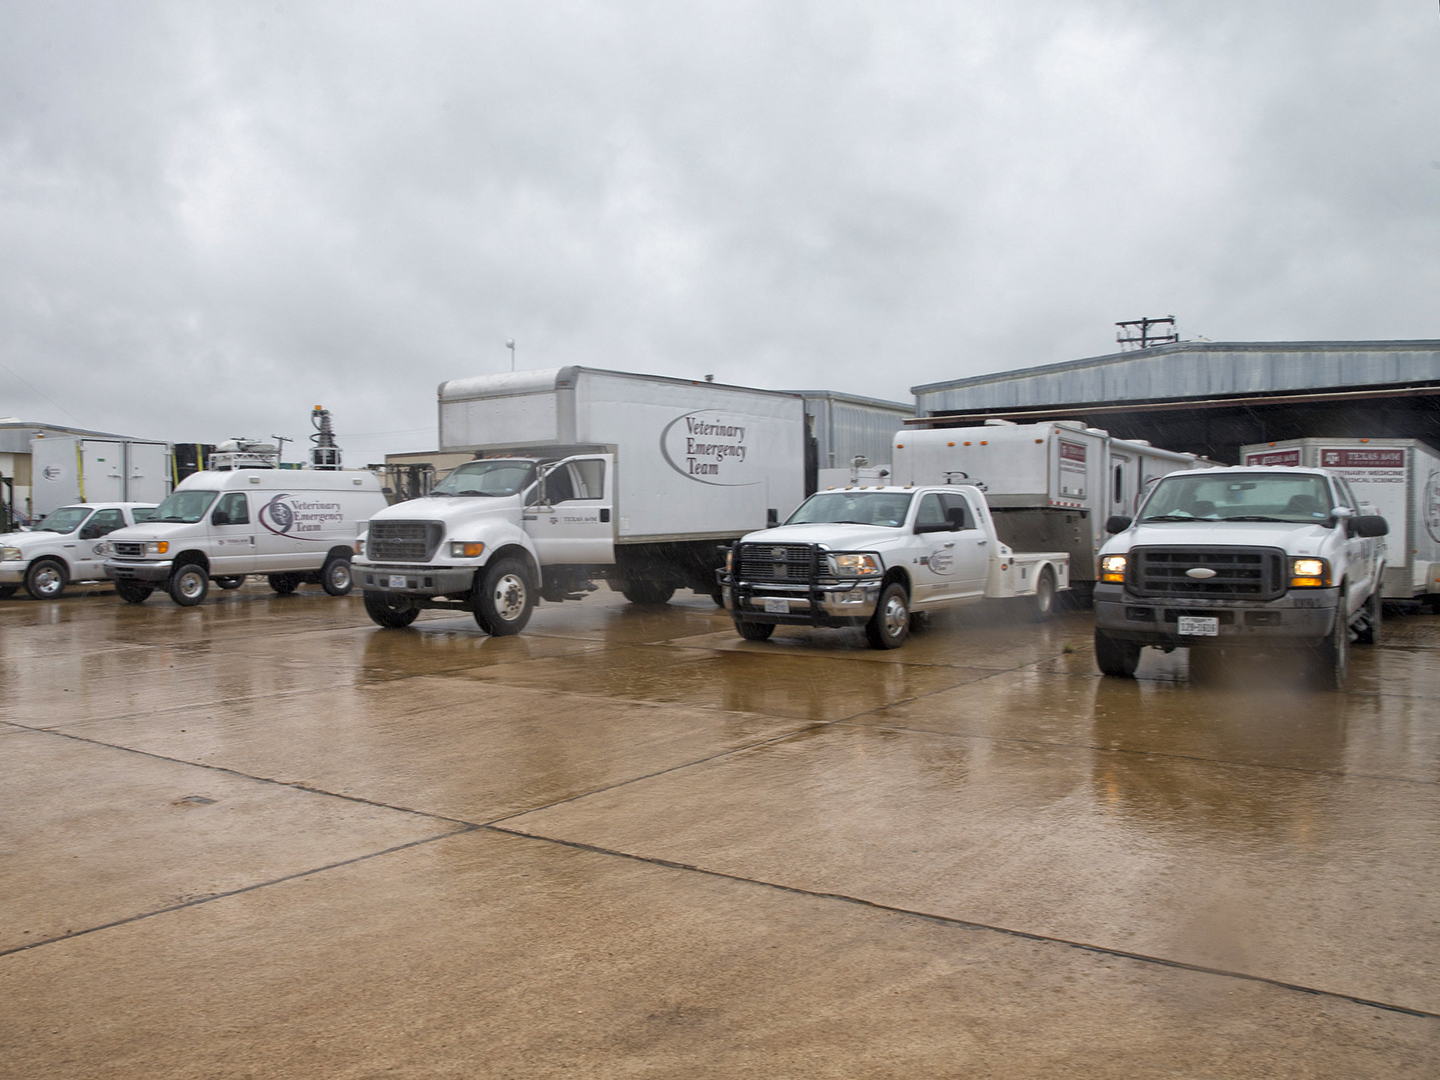 Veterinary Emergency Team Trucks lined up to deploy